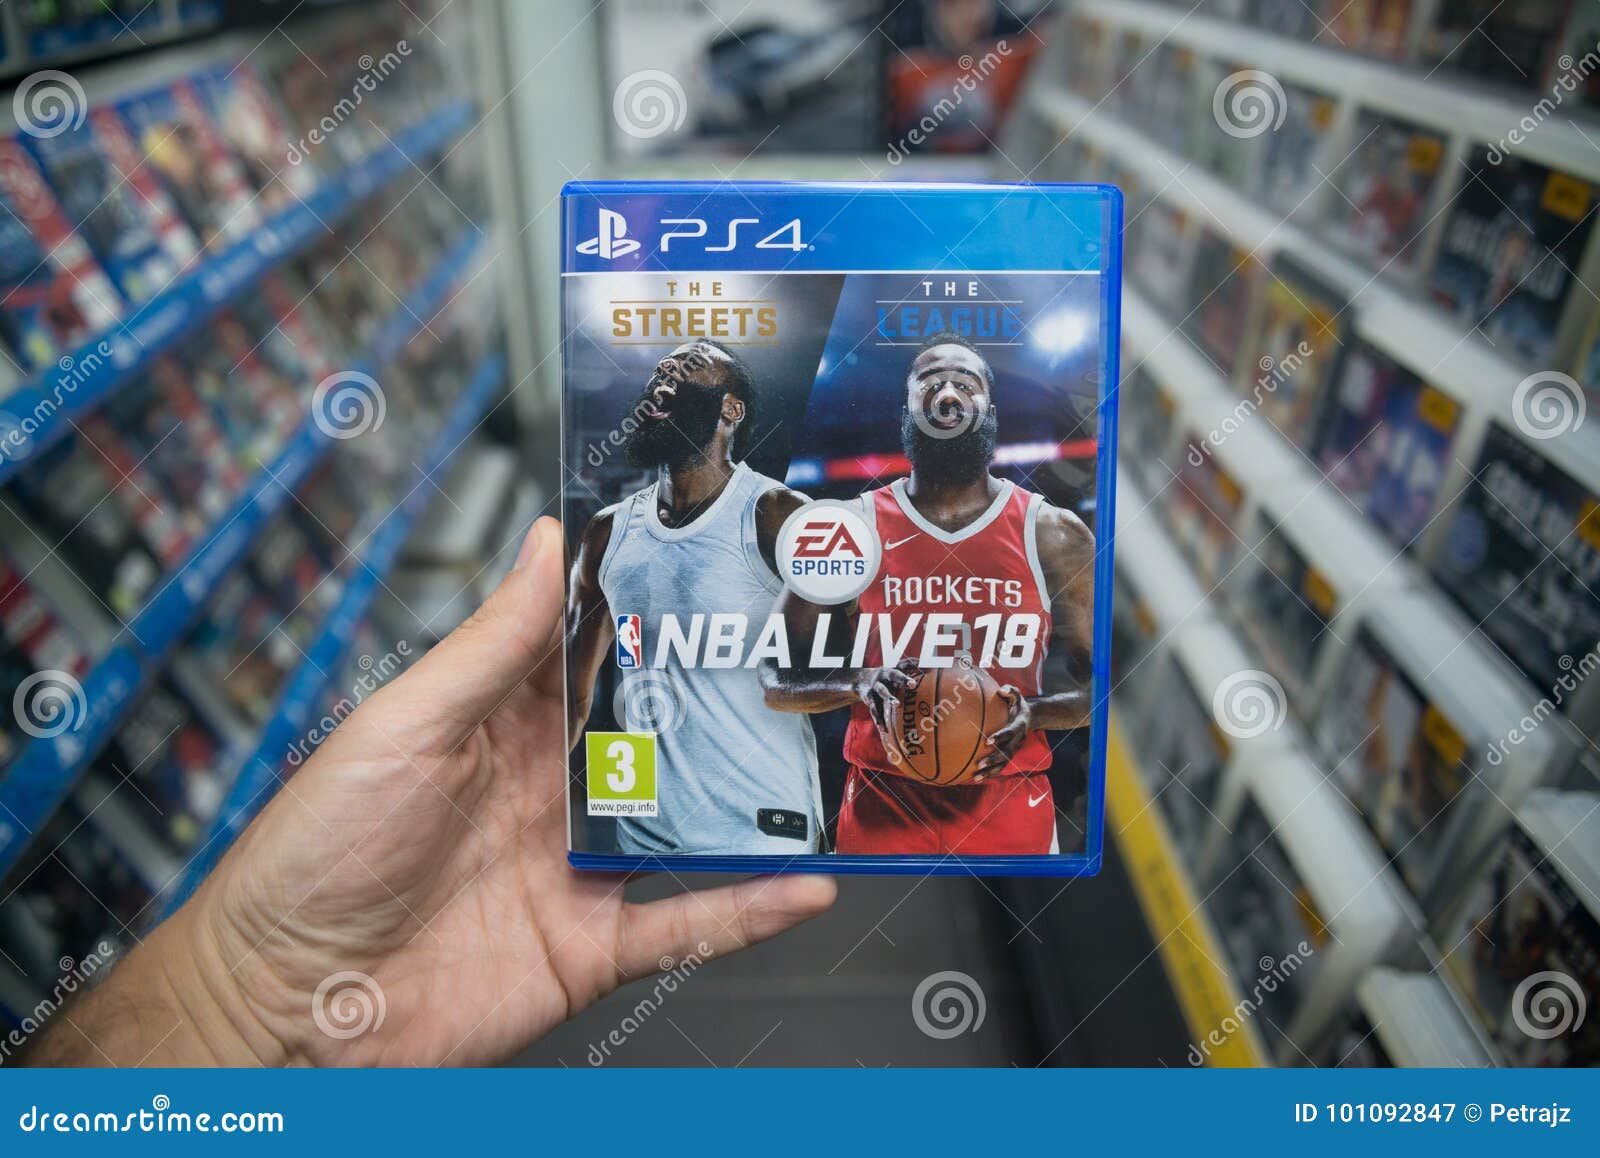 Man Holding NBA Live 18 Videogame on Sony Playstation 4 Console in Store Editorial Photography